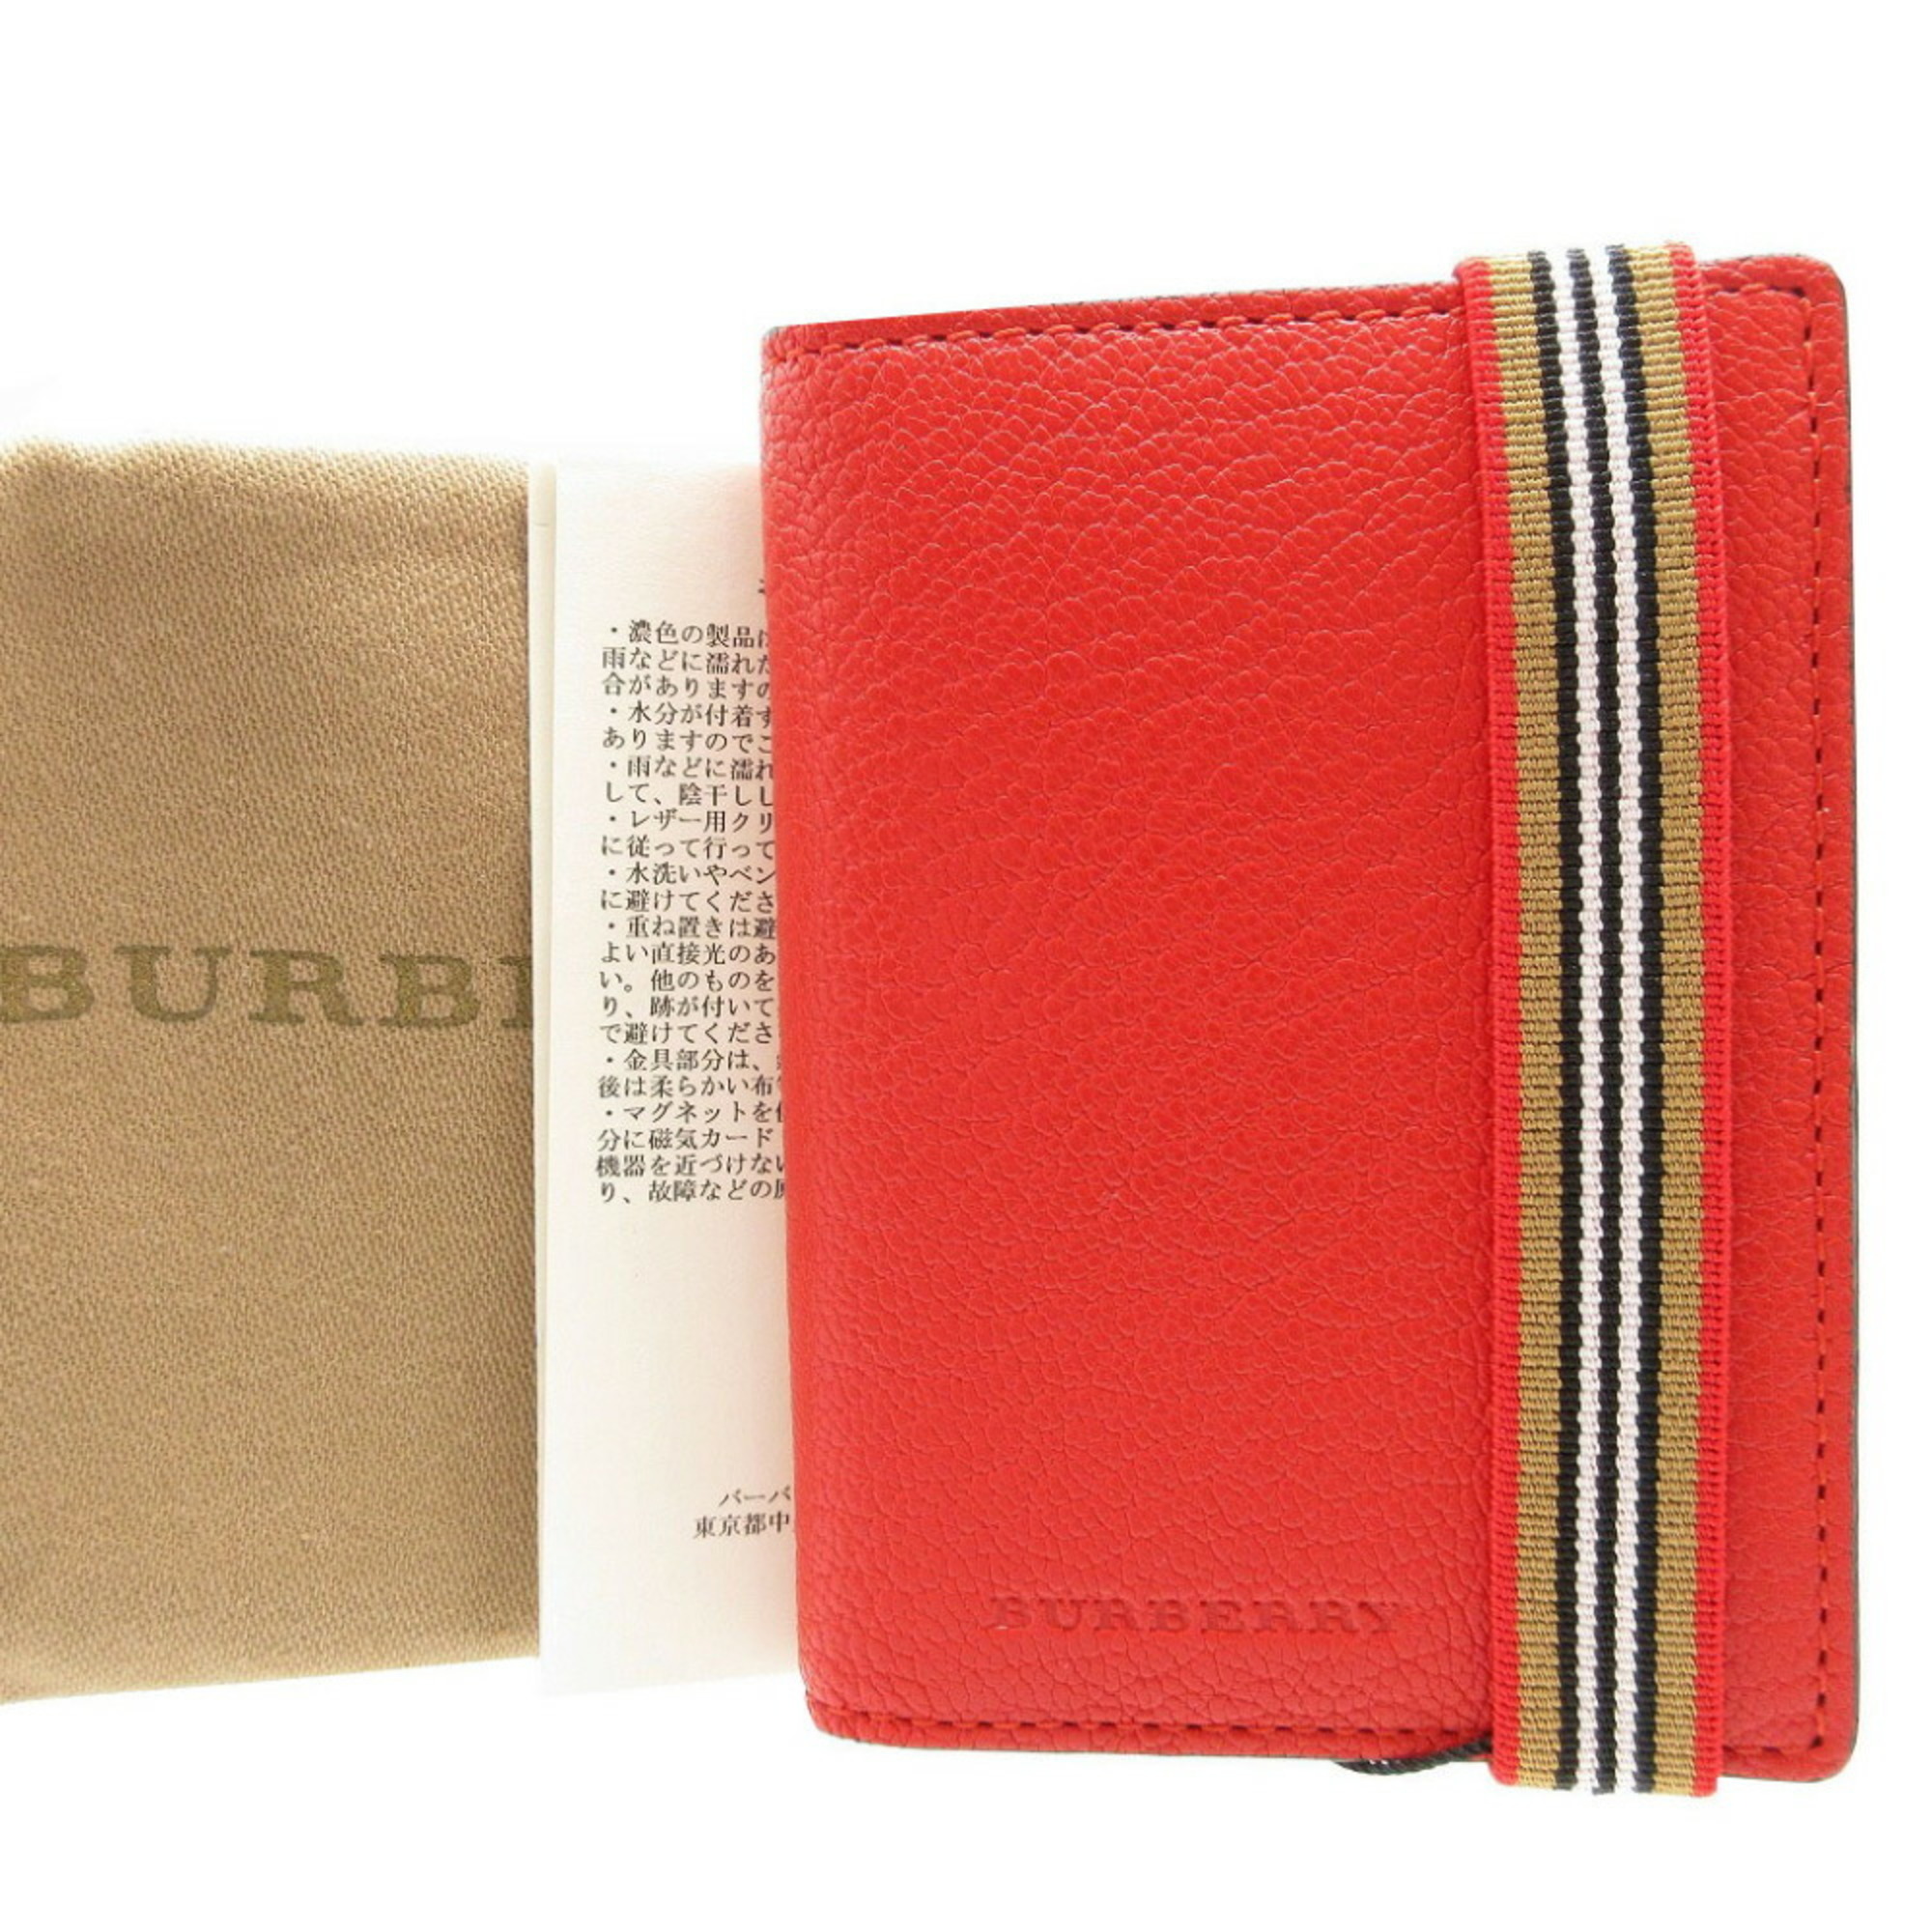 Burberry 4074895 Leather Red Card Case Business Holder BURBERRY